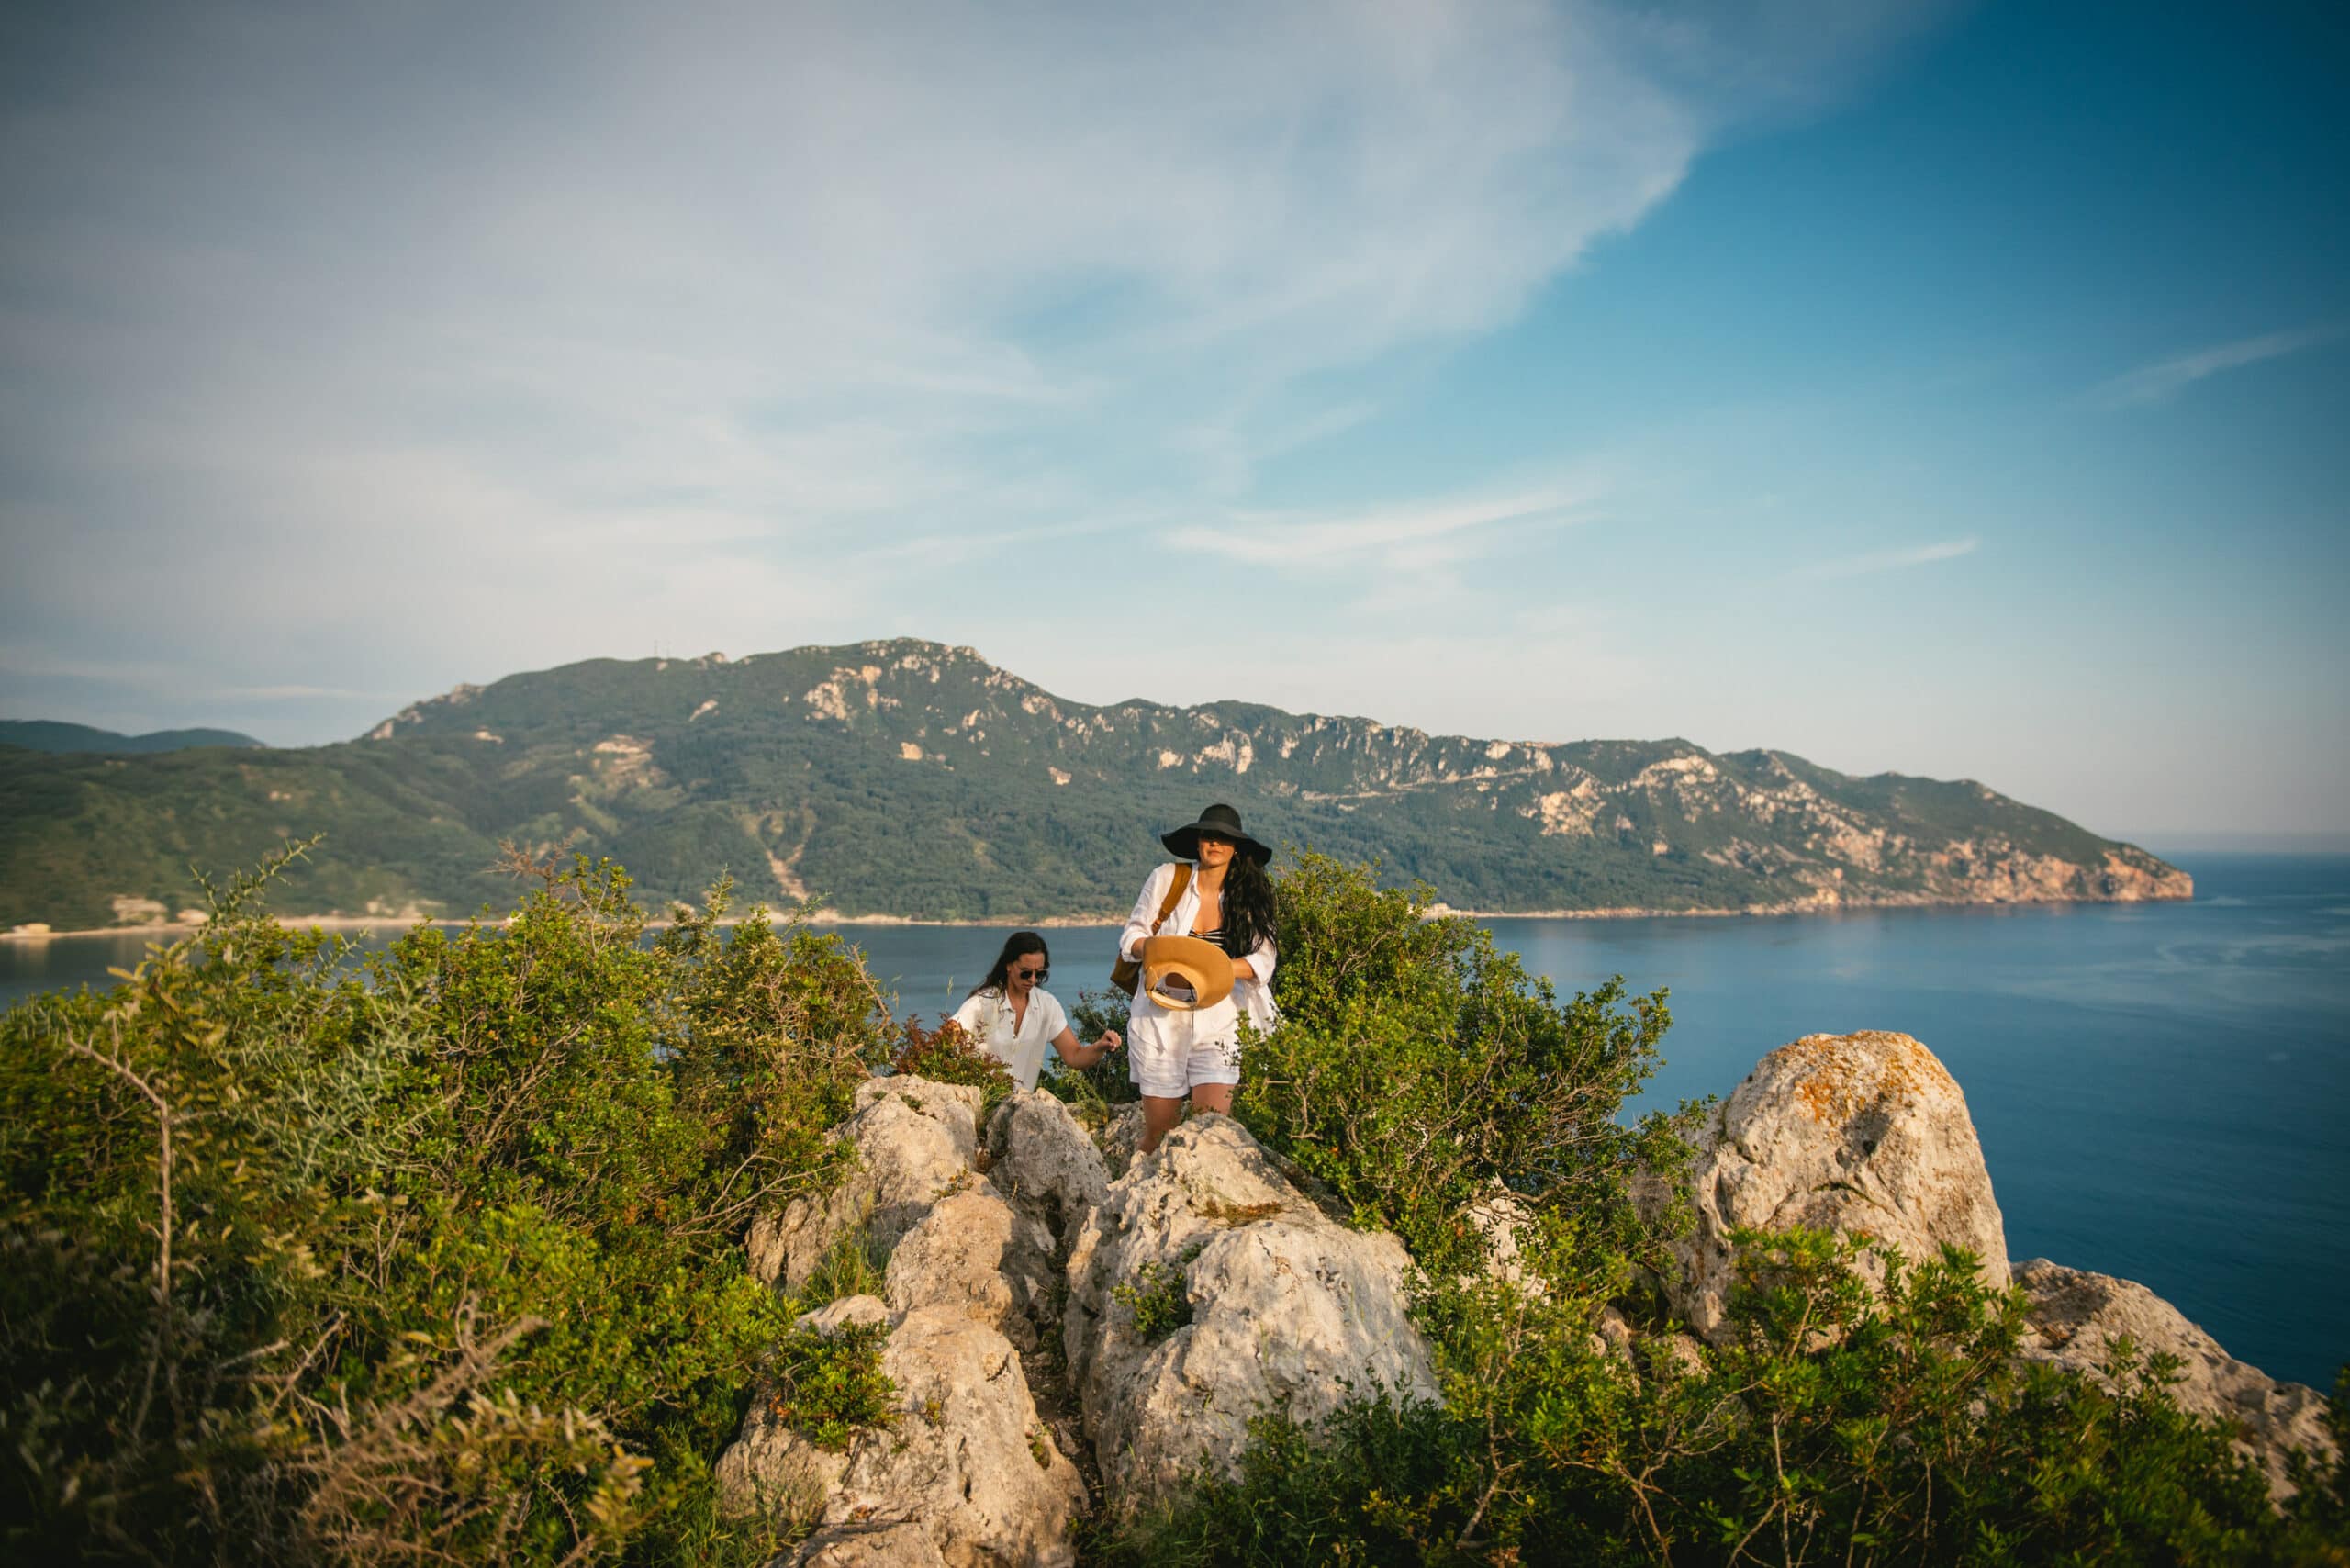 Brides gracefully walking on the rocky terrain, embracing the natural beauty of Corfu.